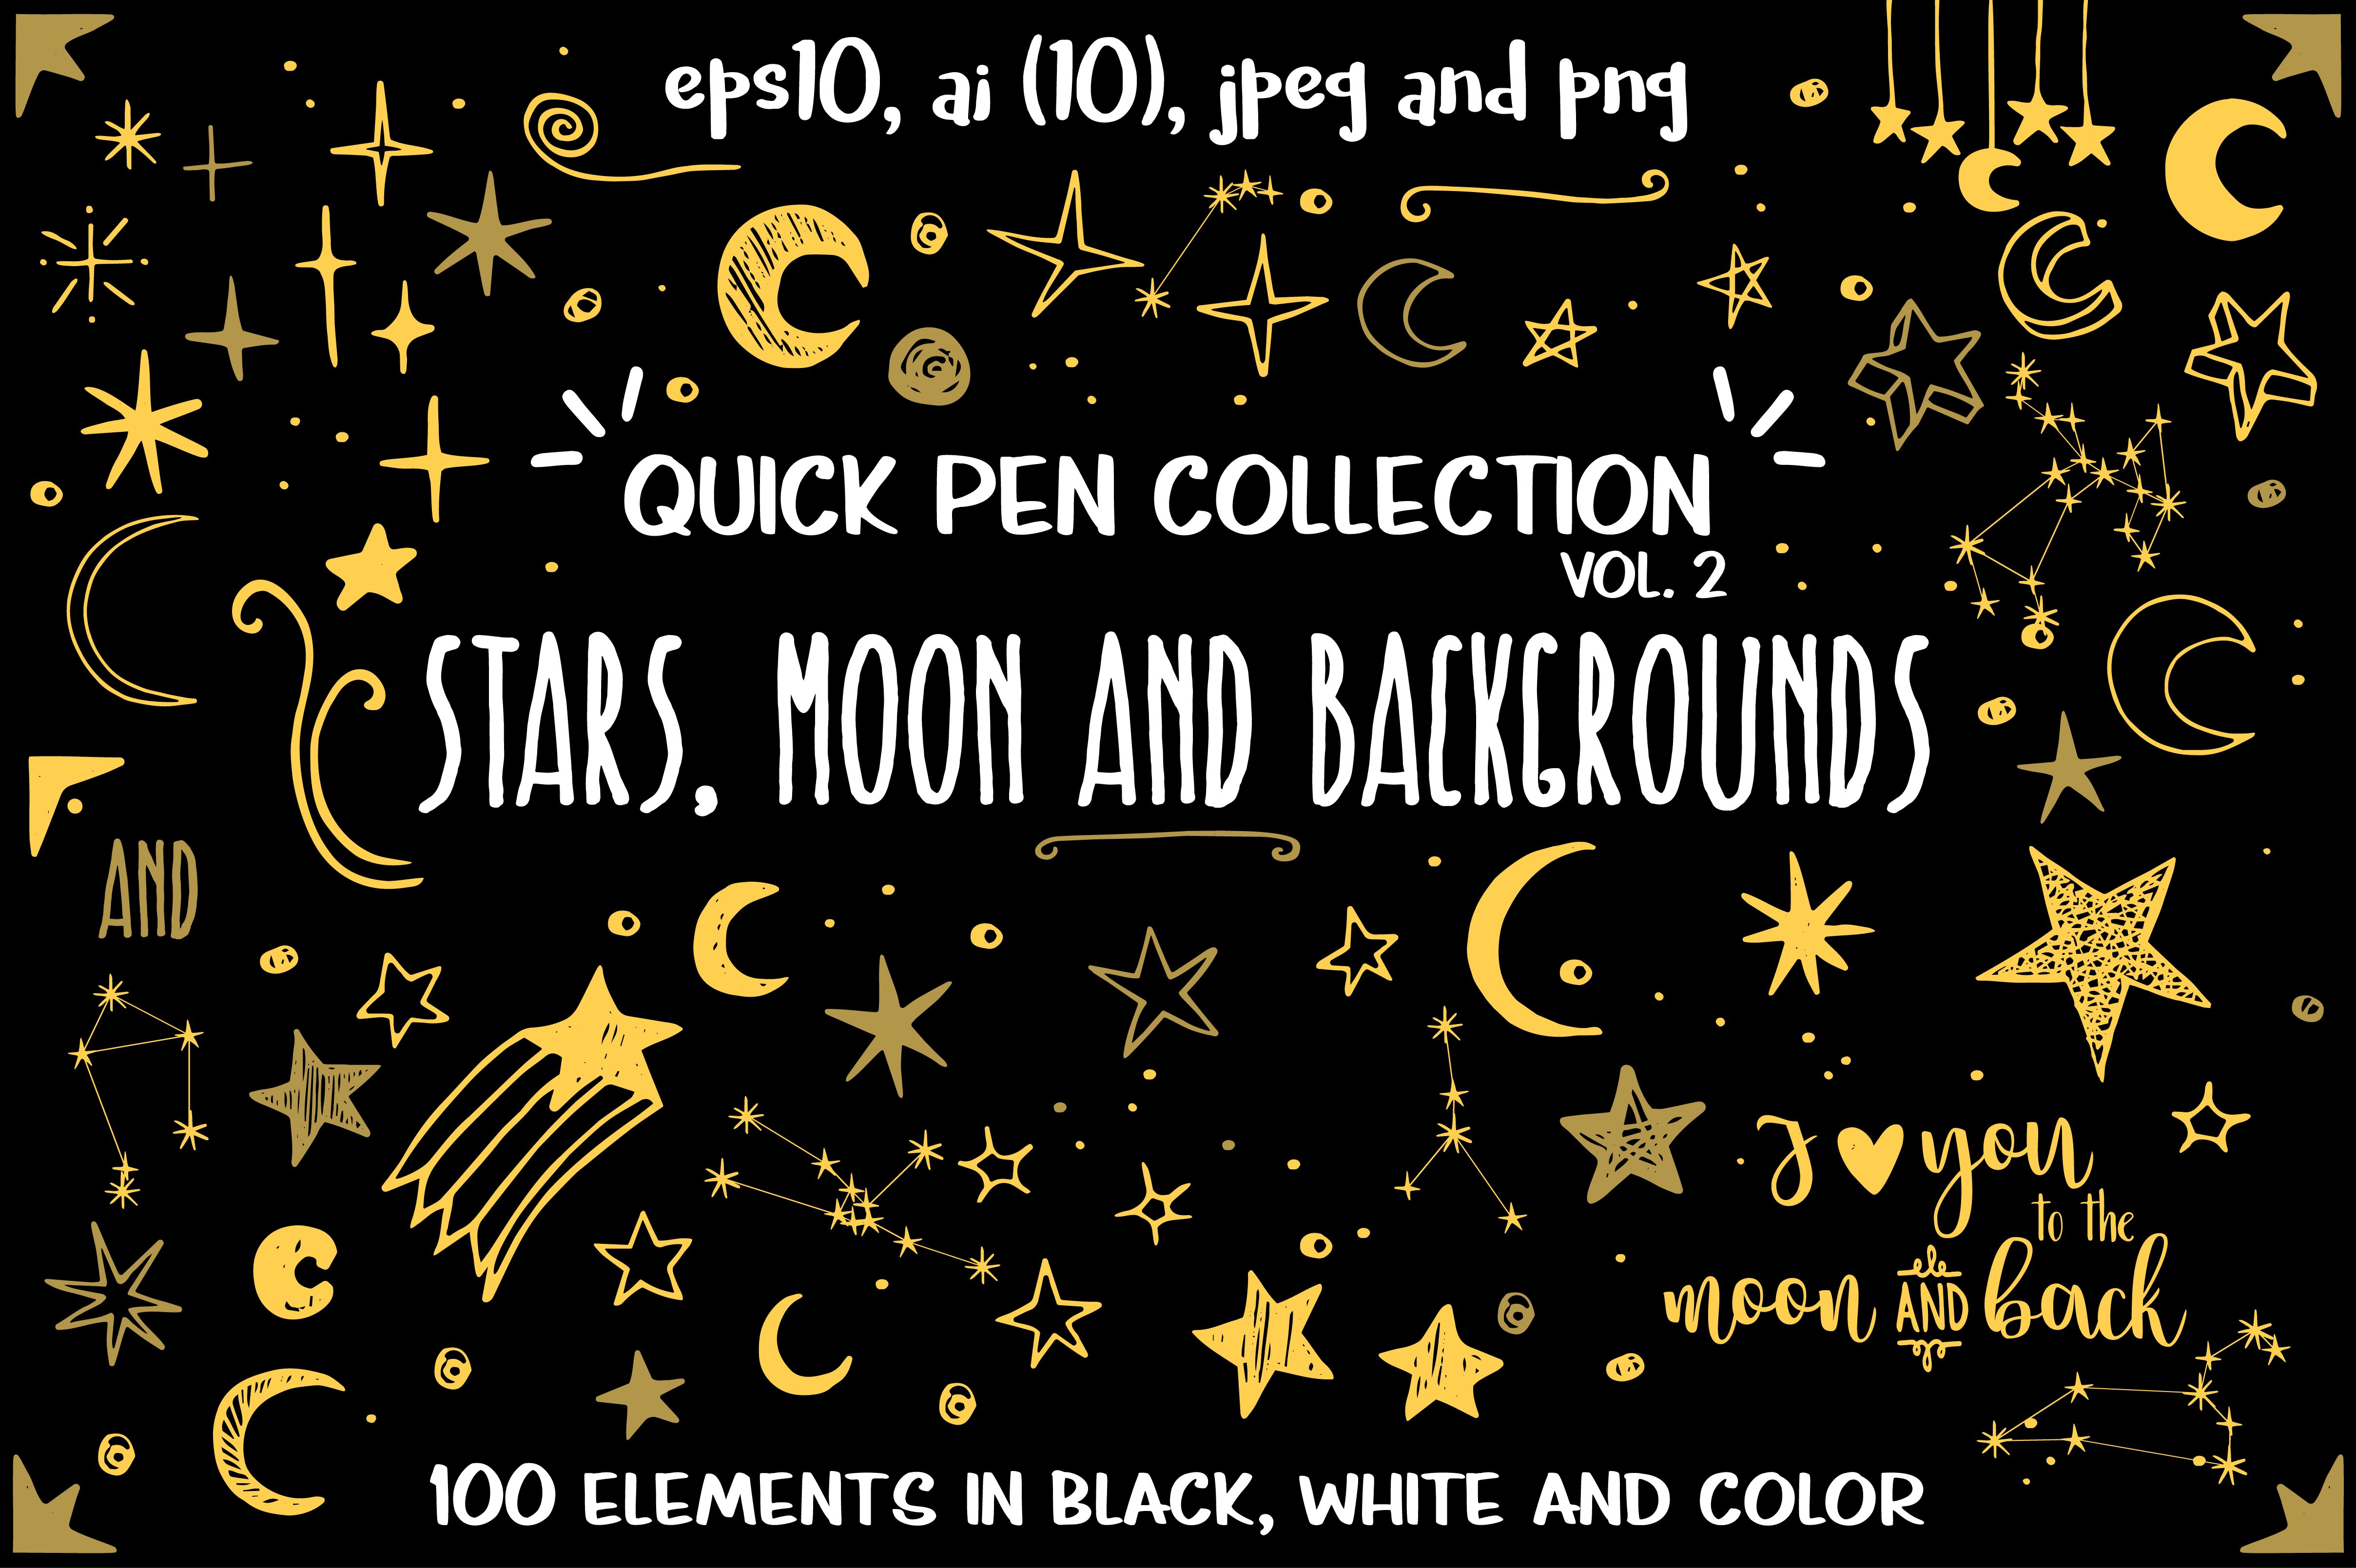 Stars, moon and backgrounds cover image.